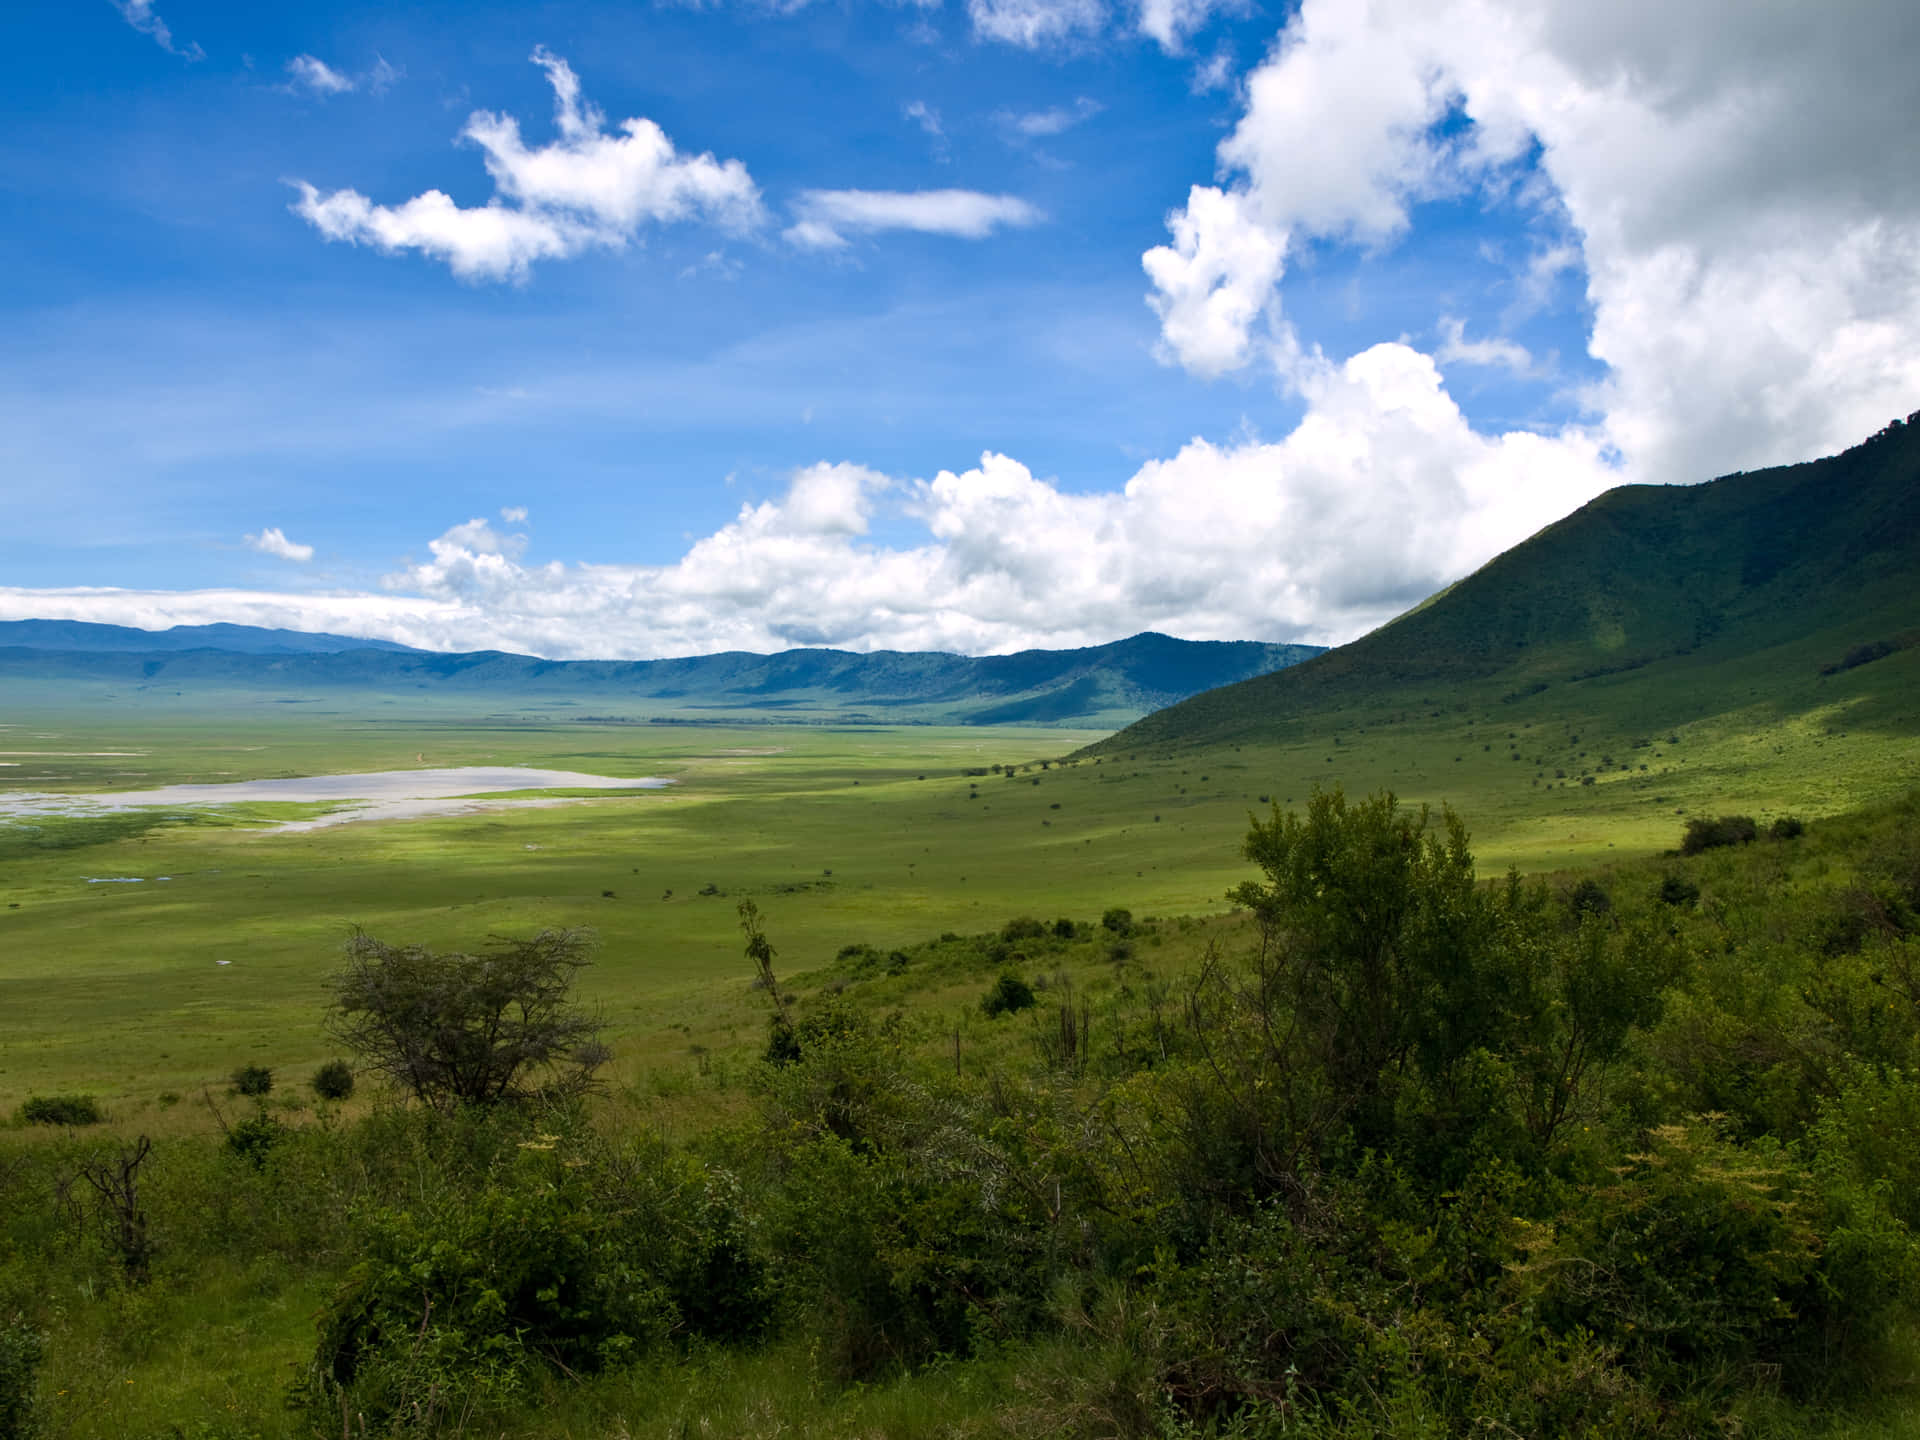 Caption: Majestic View of Ngorongoro Crater in Northern Tanzania Wallpaper